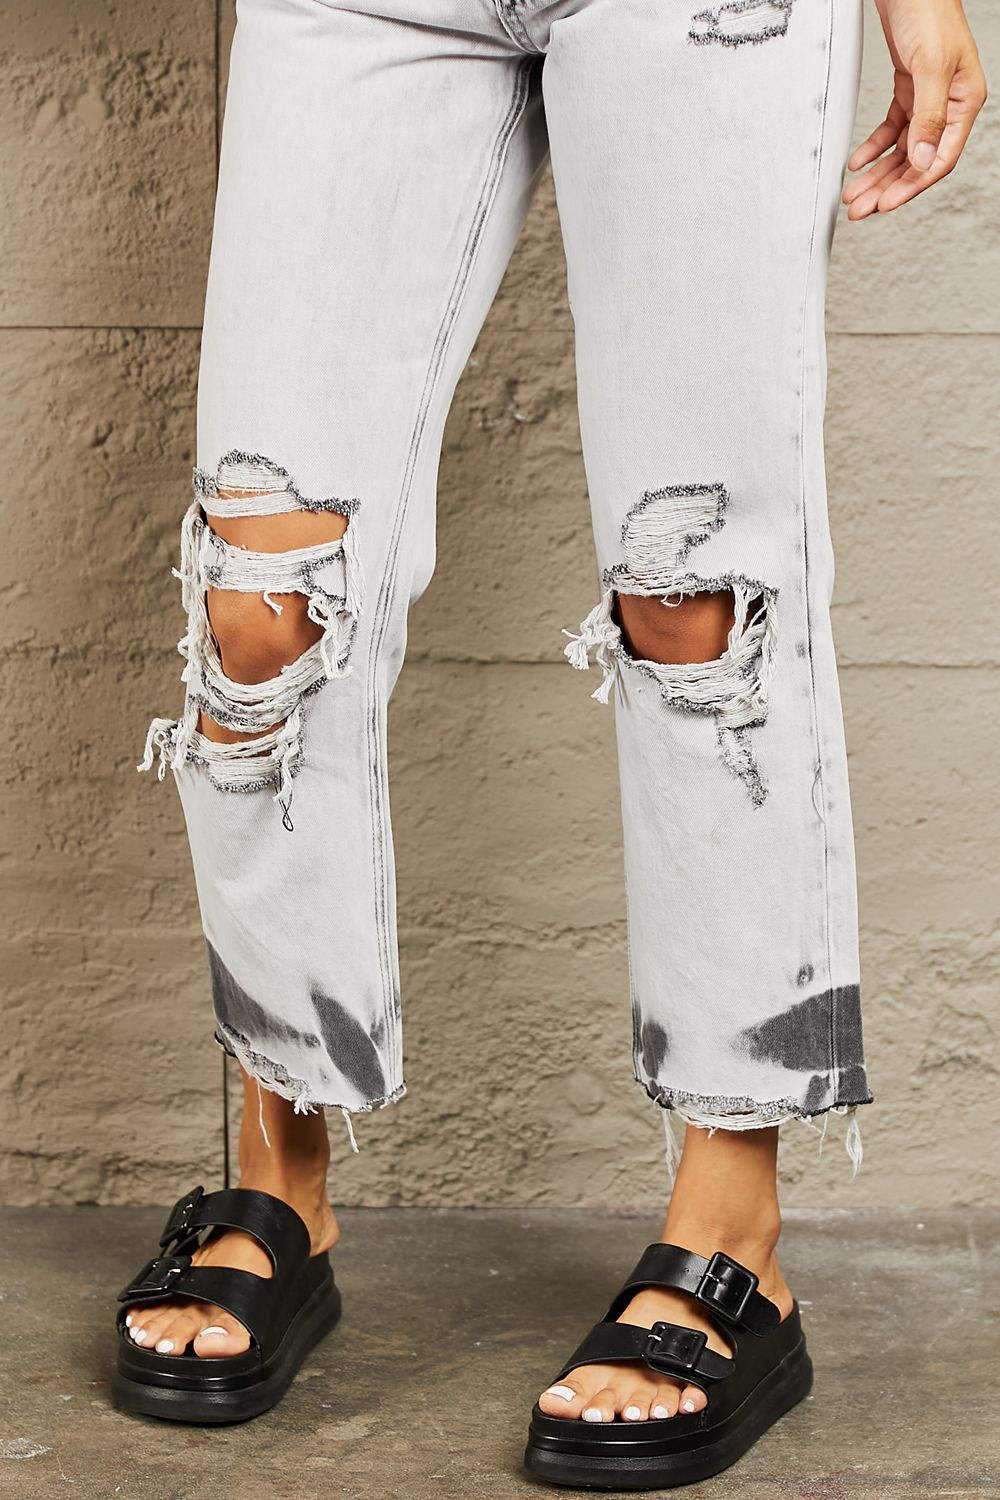 THE CUTEST MOM JEANS